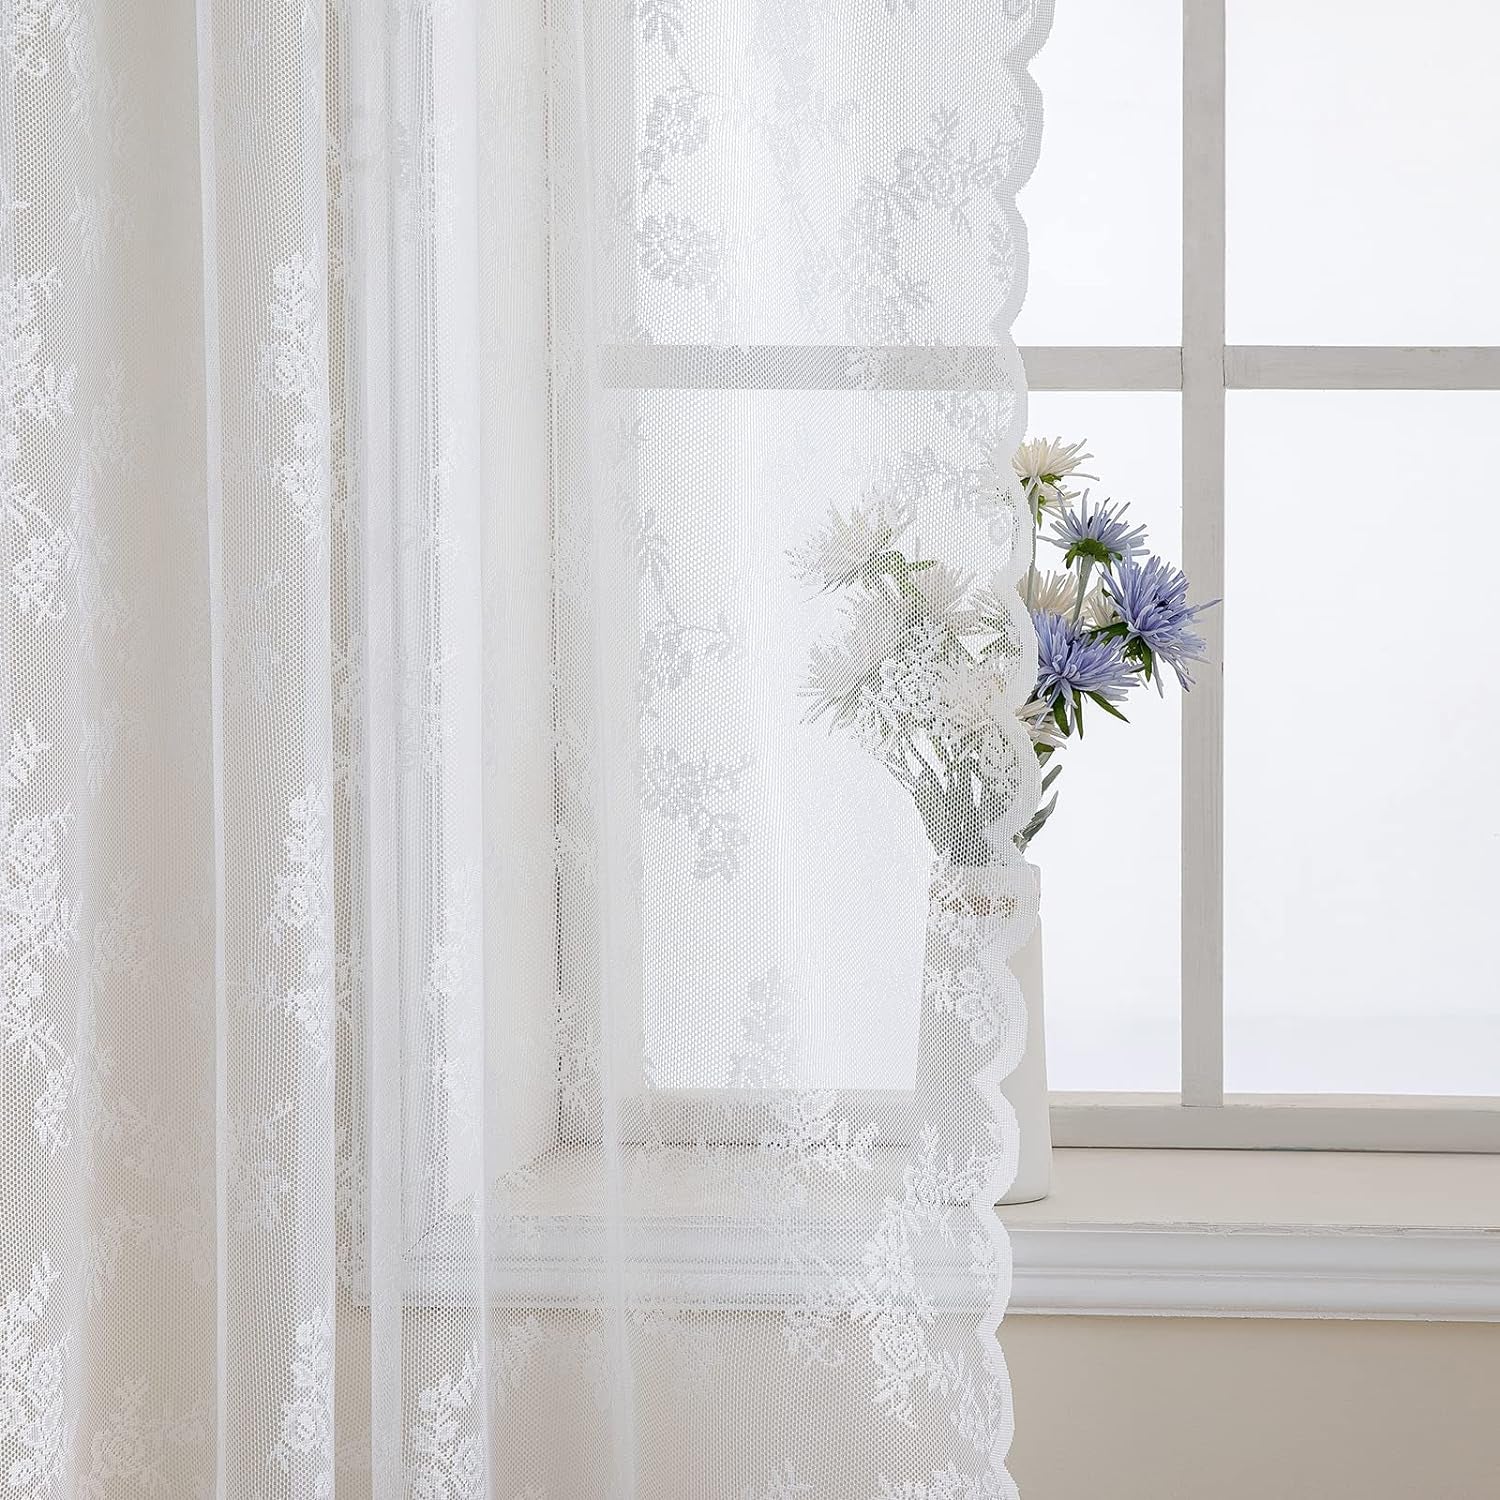 MIULEE White Lace Curtains 84 Inches Long for Living Room Bedroom, Scalloped Sheer Curtains Rose Floral Embroidered Farmhouse Window Drapes Vintage European Tulle Retro Style, Rod Pocket, 2 Panels Set  MIULEE   